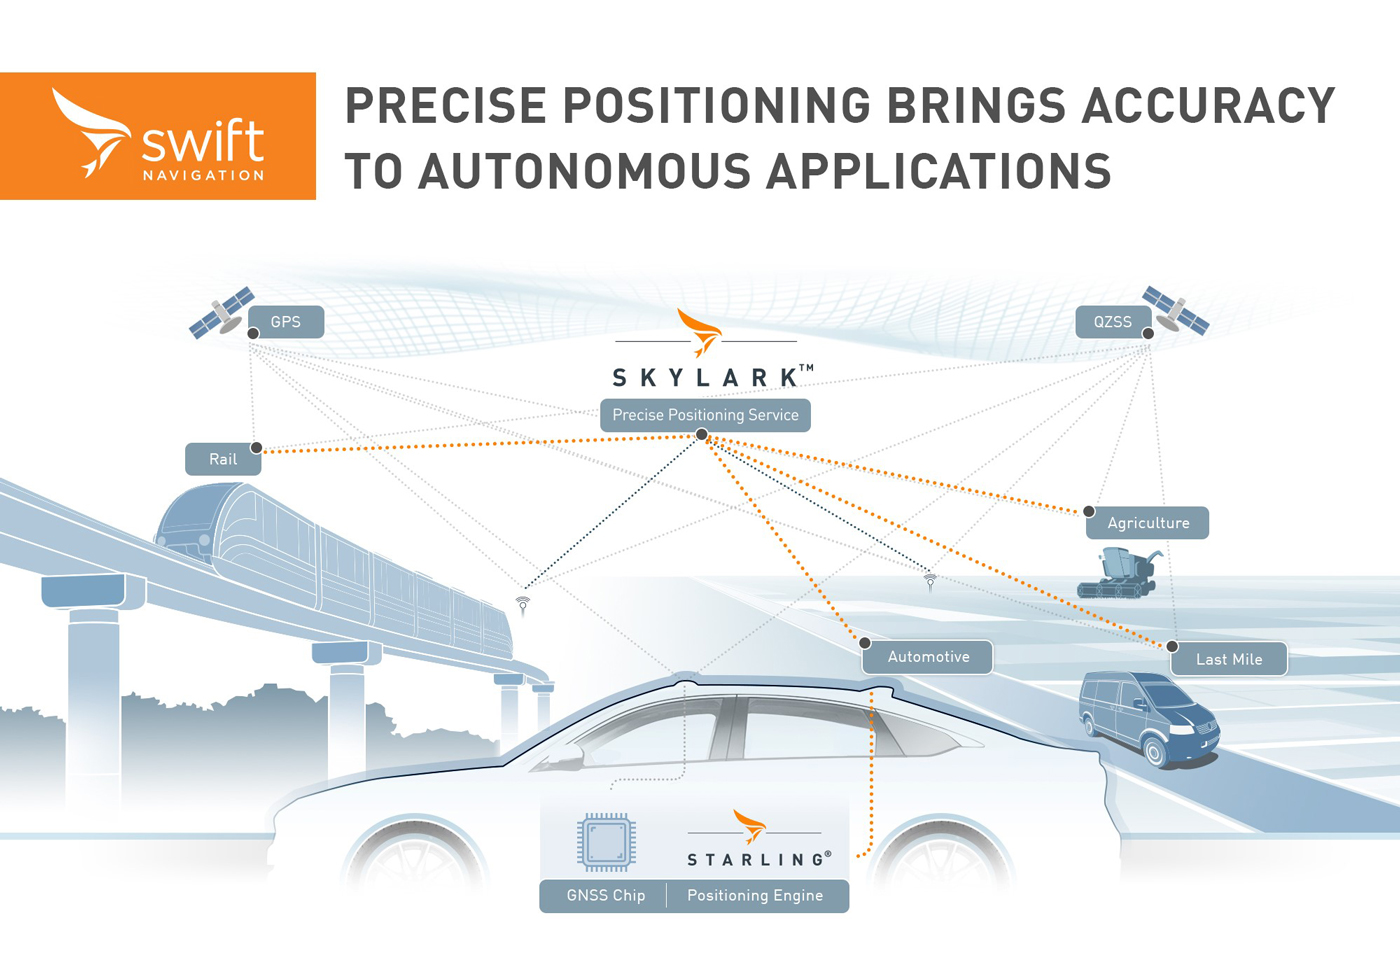 PRECISE POSITIONING BRINGS ACCURACY TO AUTONOMOUS APPLICATIONS